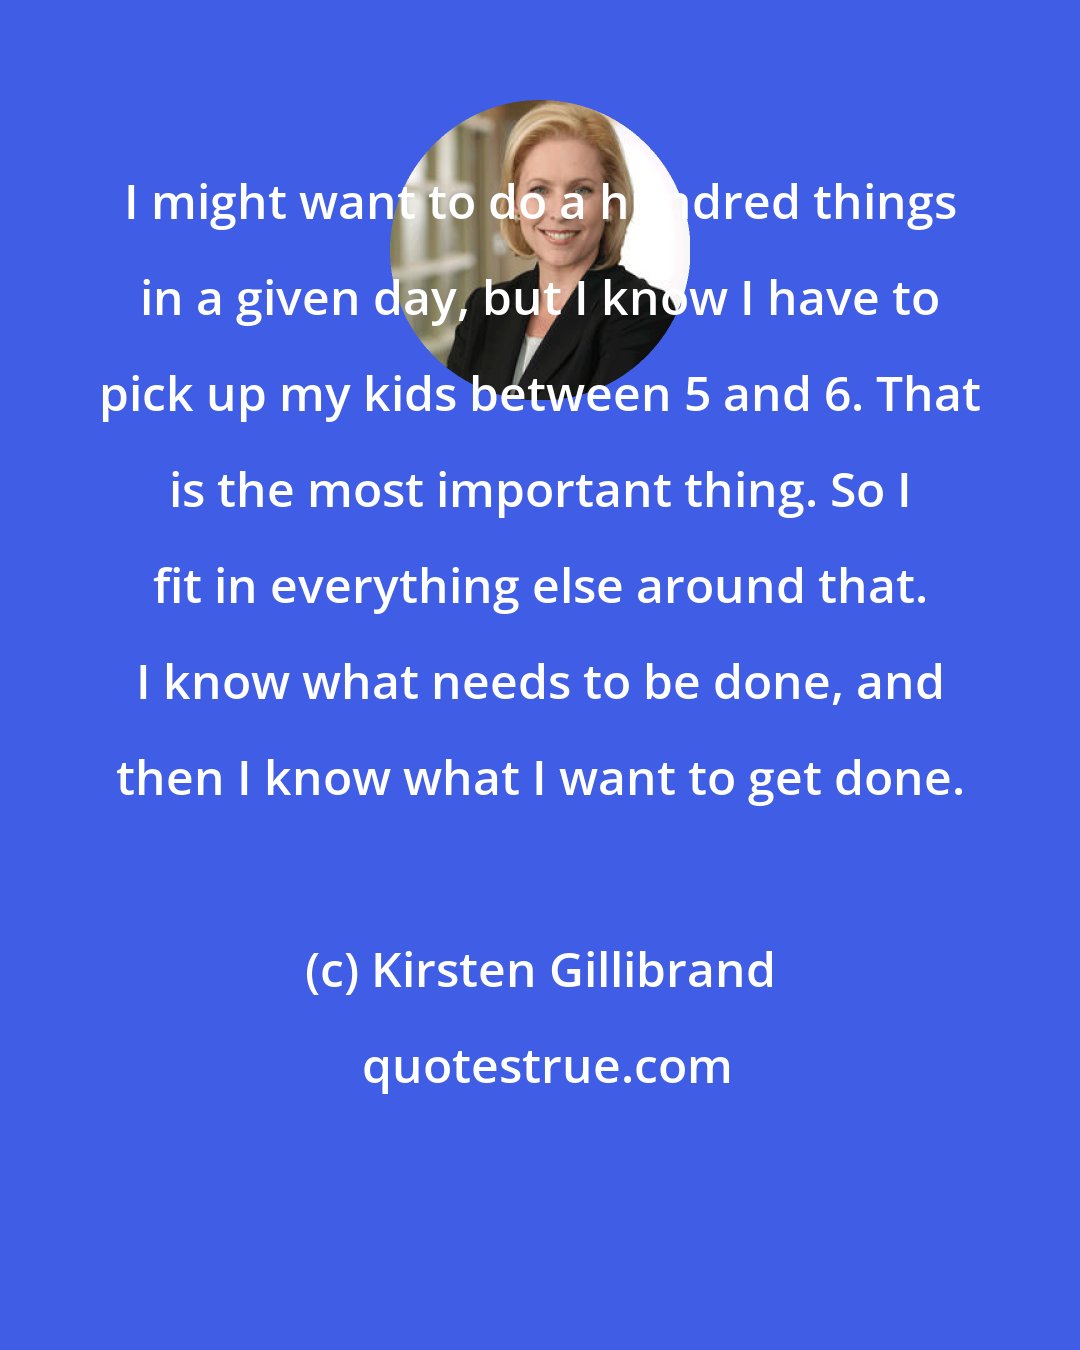 Kirsten Gillibrand: I might want to do a hundred things in a given day, but I know I have to pick up my kids between 5 and 6. That is the most important thing. So I fit in everything else around that. I know what needs to be done, and then I know what I want to get done.